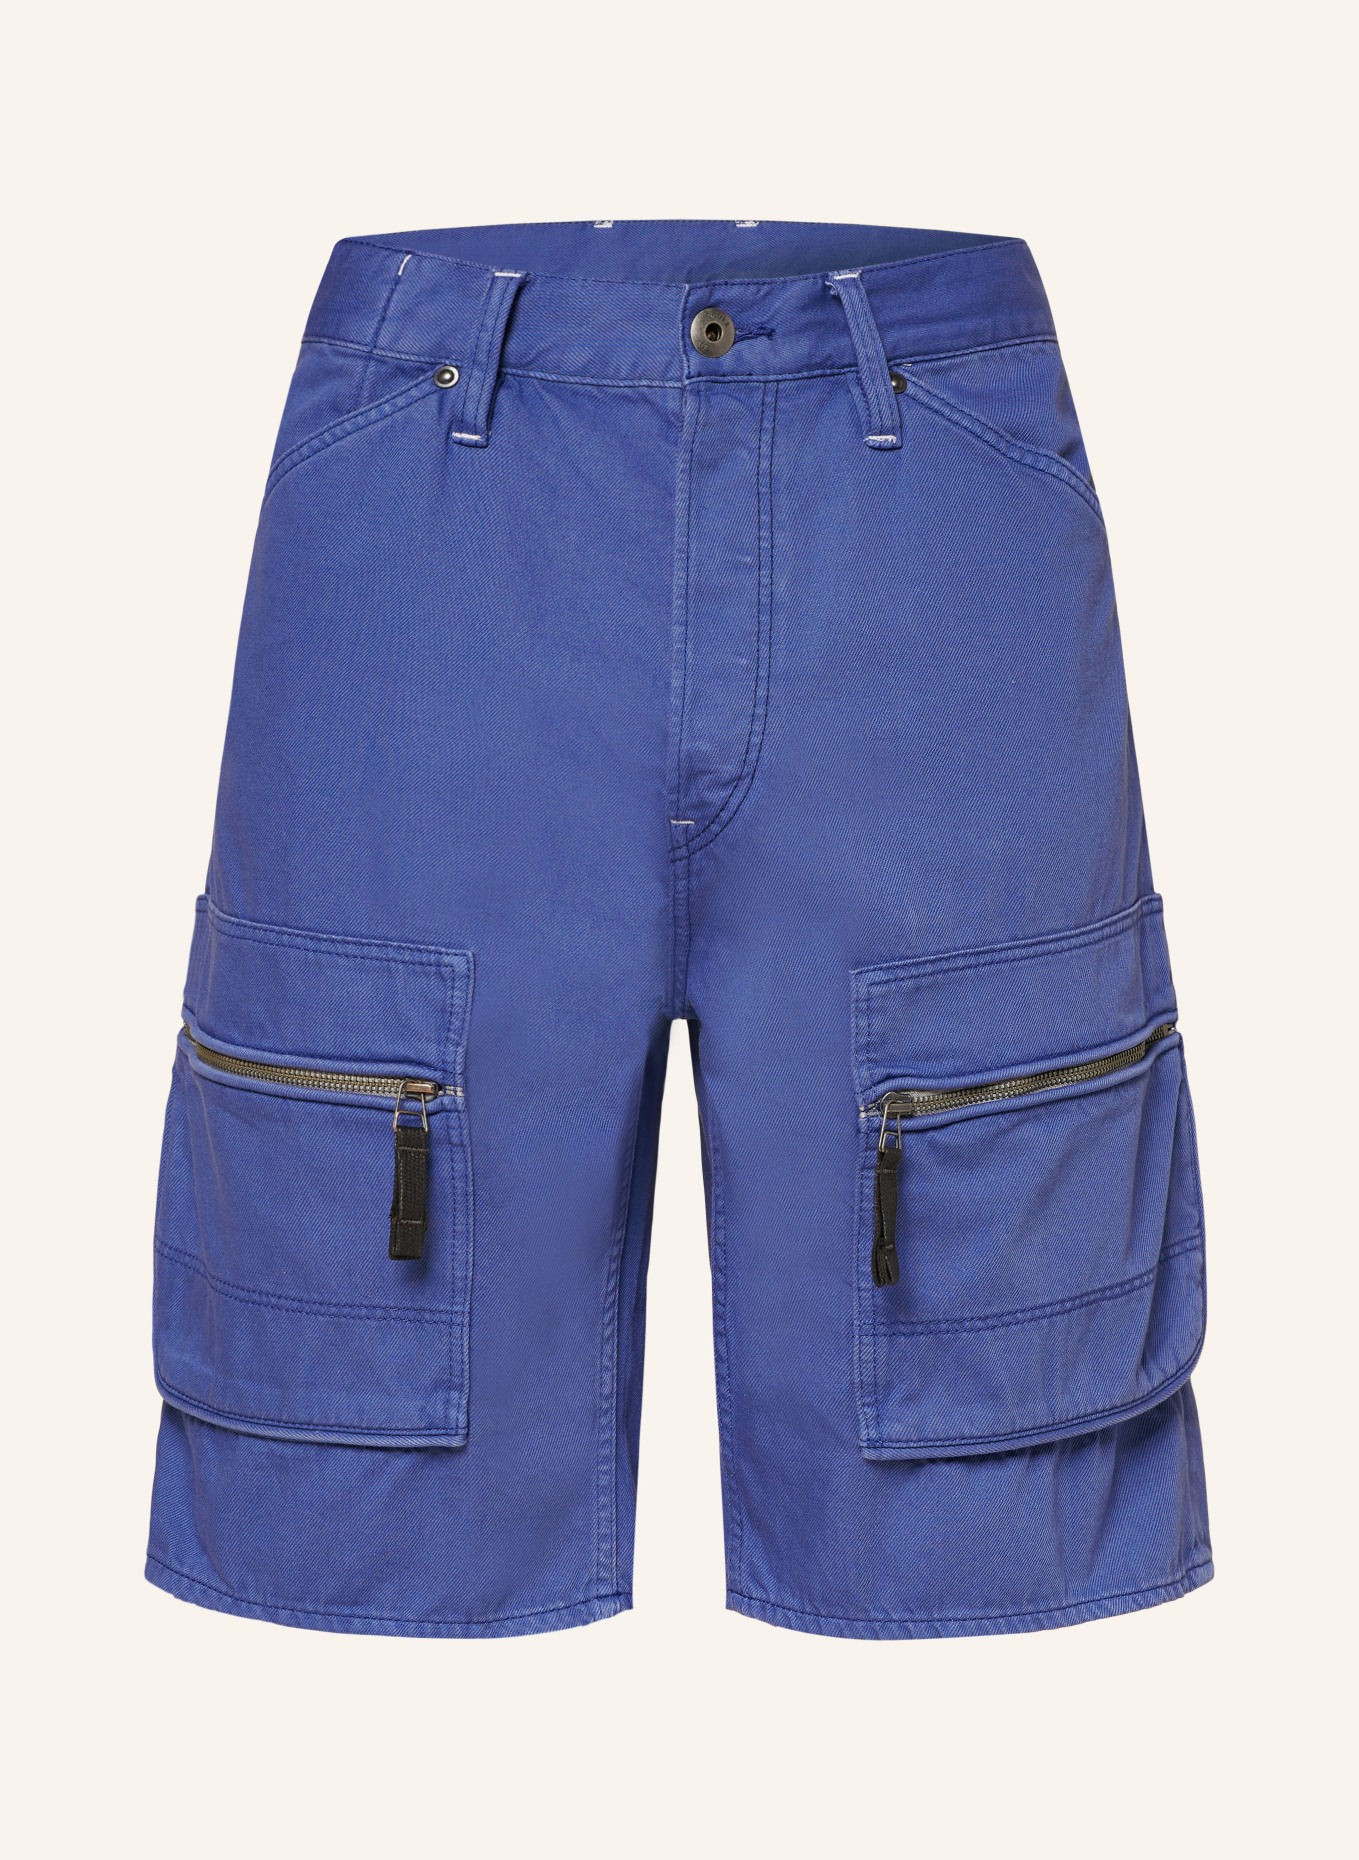 G-Star RAW Cargo shorts regular fit, Color: G336 faded blue papillon gd (Image 1)